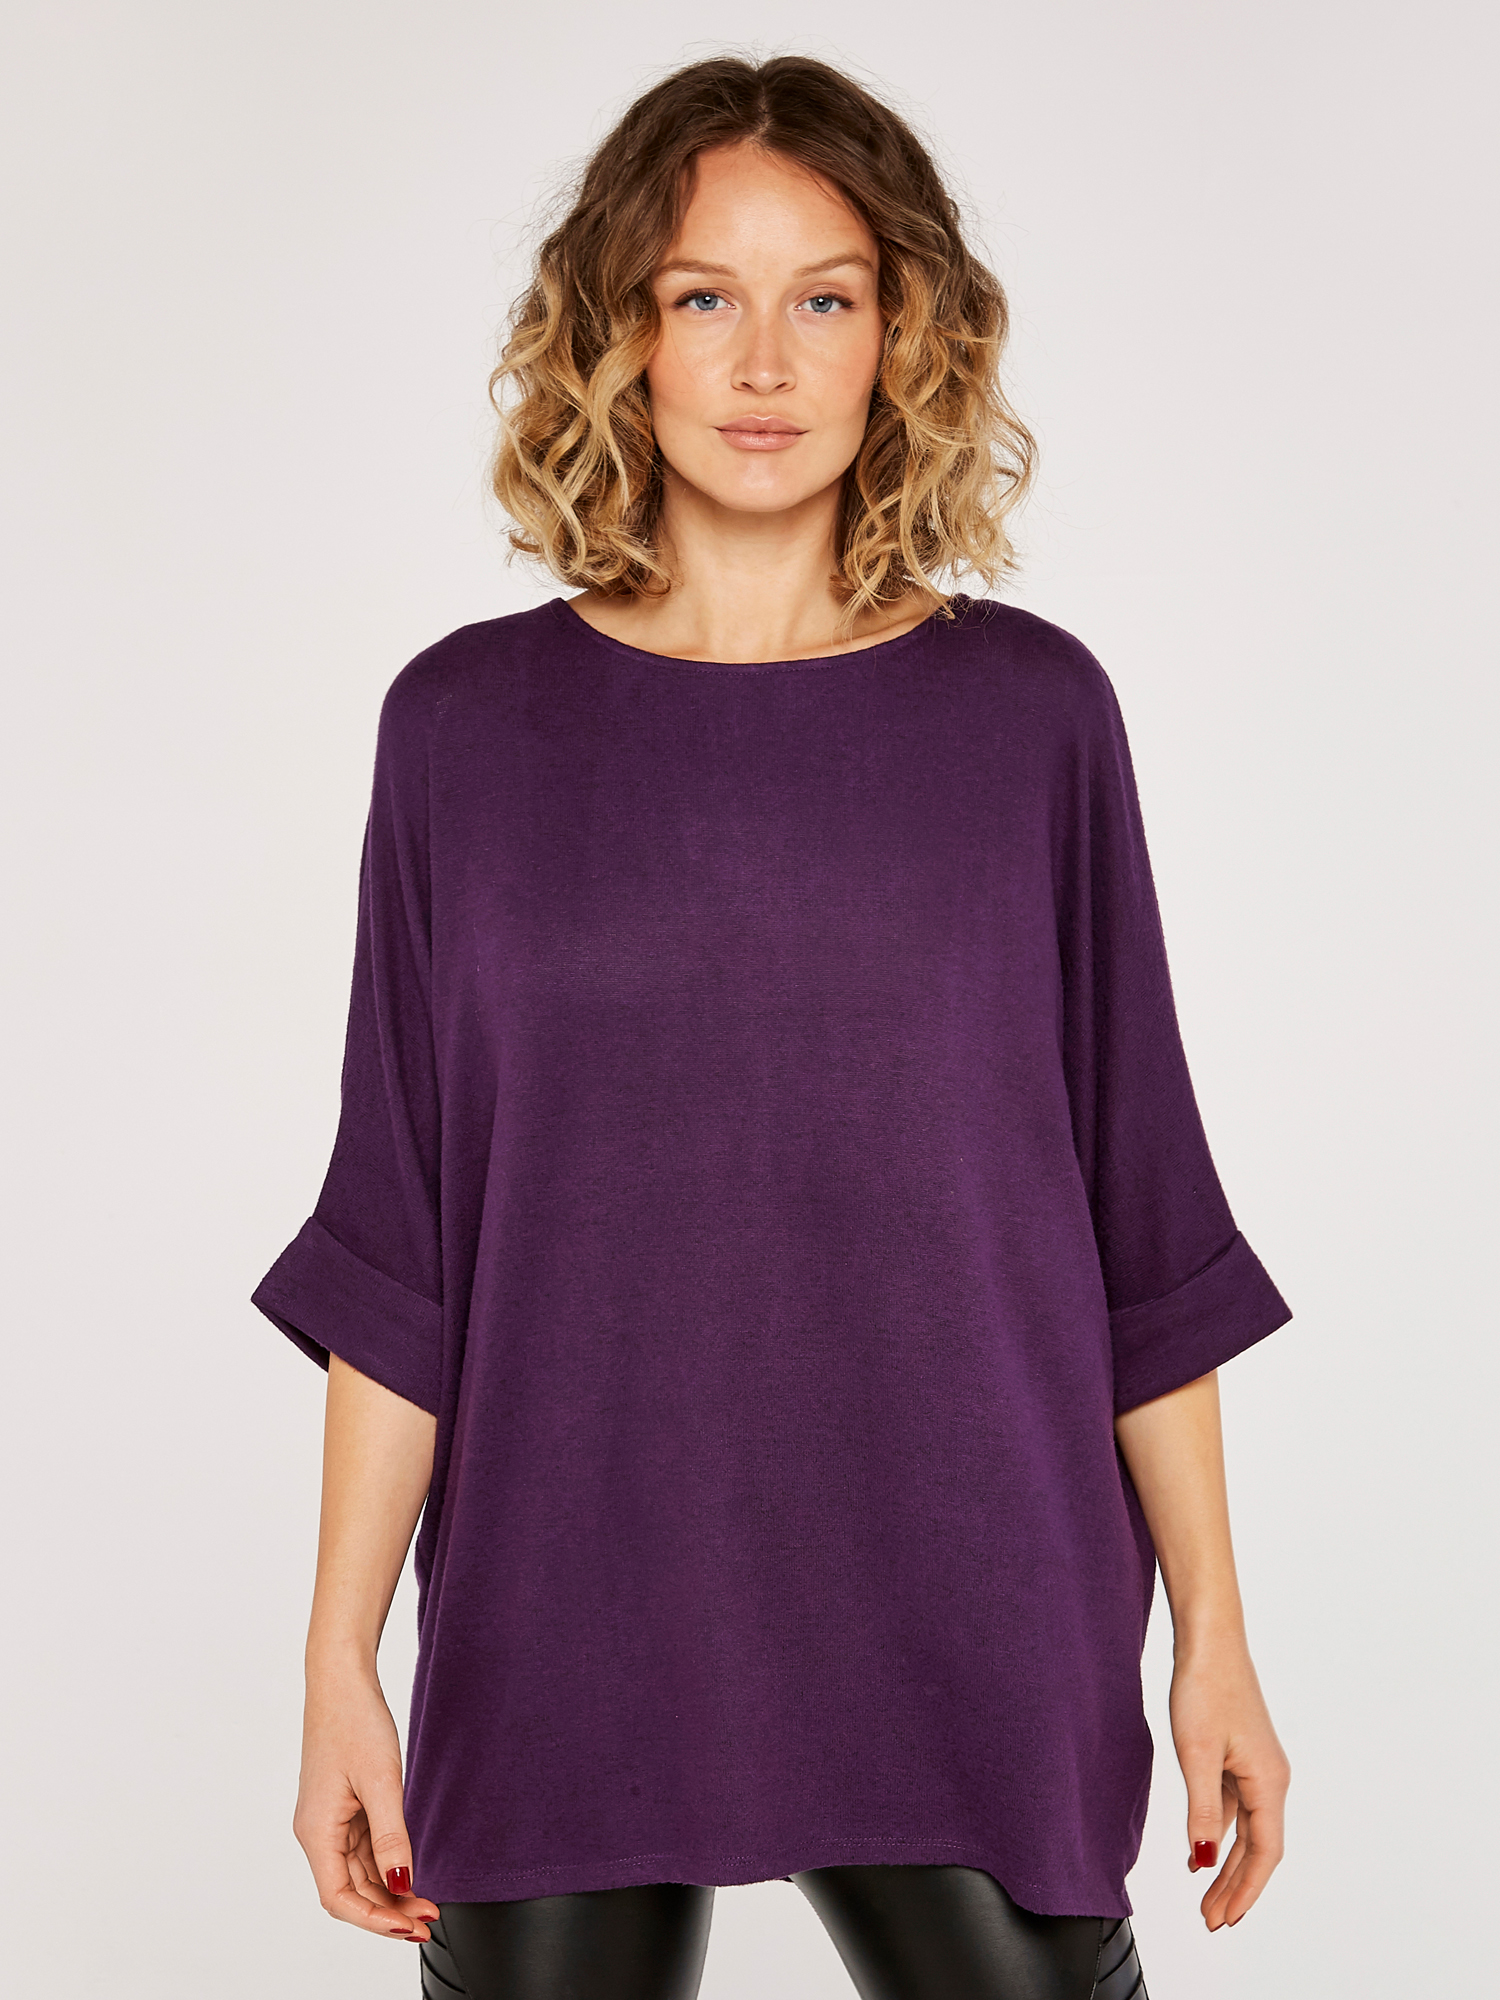 Soft Touch Batwing Top | Apricot Clothing